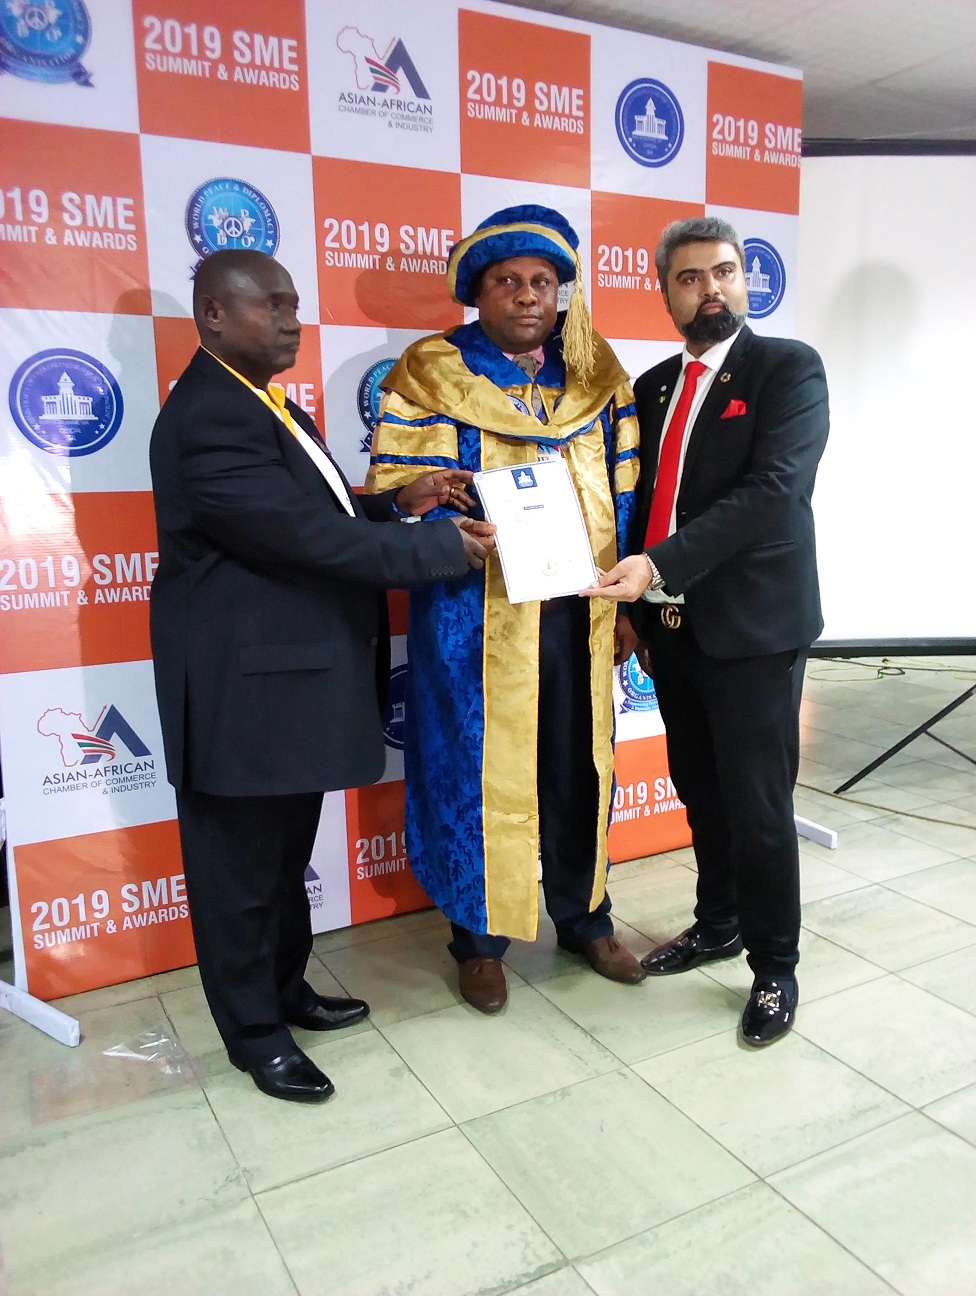 mr-alhaji-chief-tosin-taiwo-leaving-ceremony-with-honorary-doctoral-award-from-the-uet-during-2019-sme-summit-held-in-lagos-on-saturday-27-april-2019